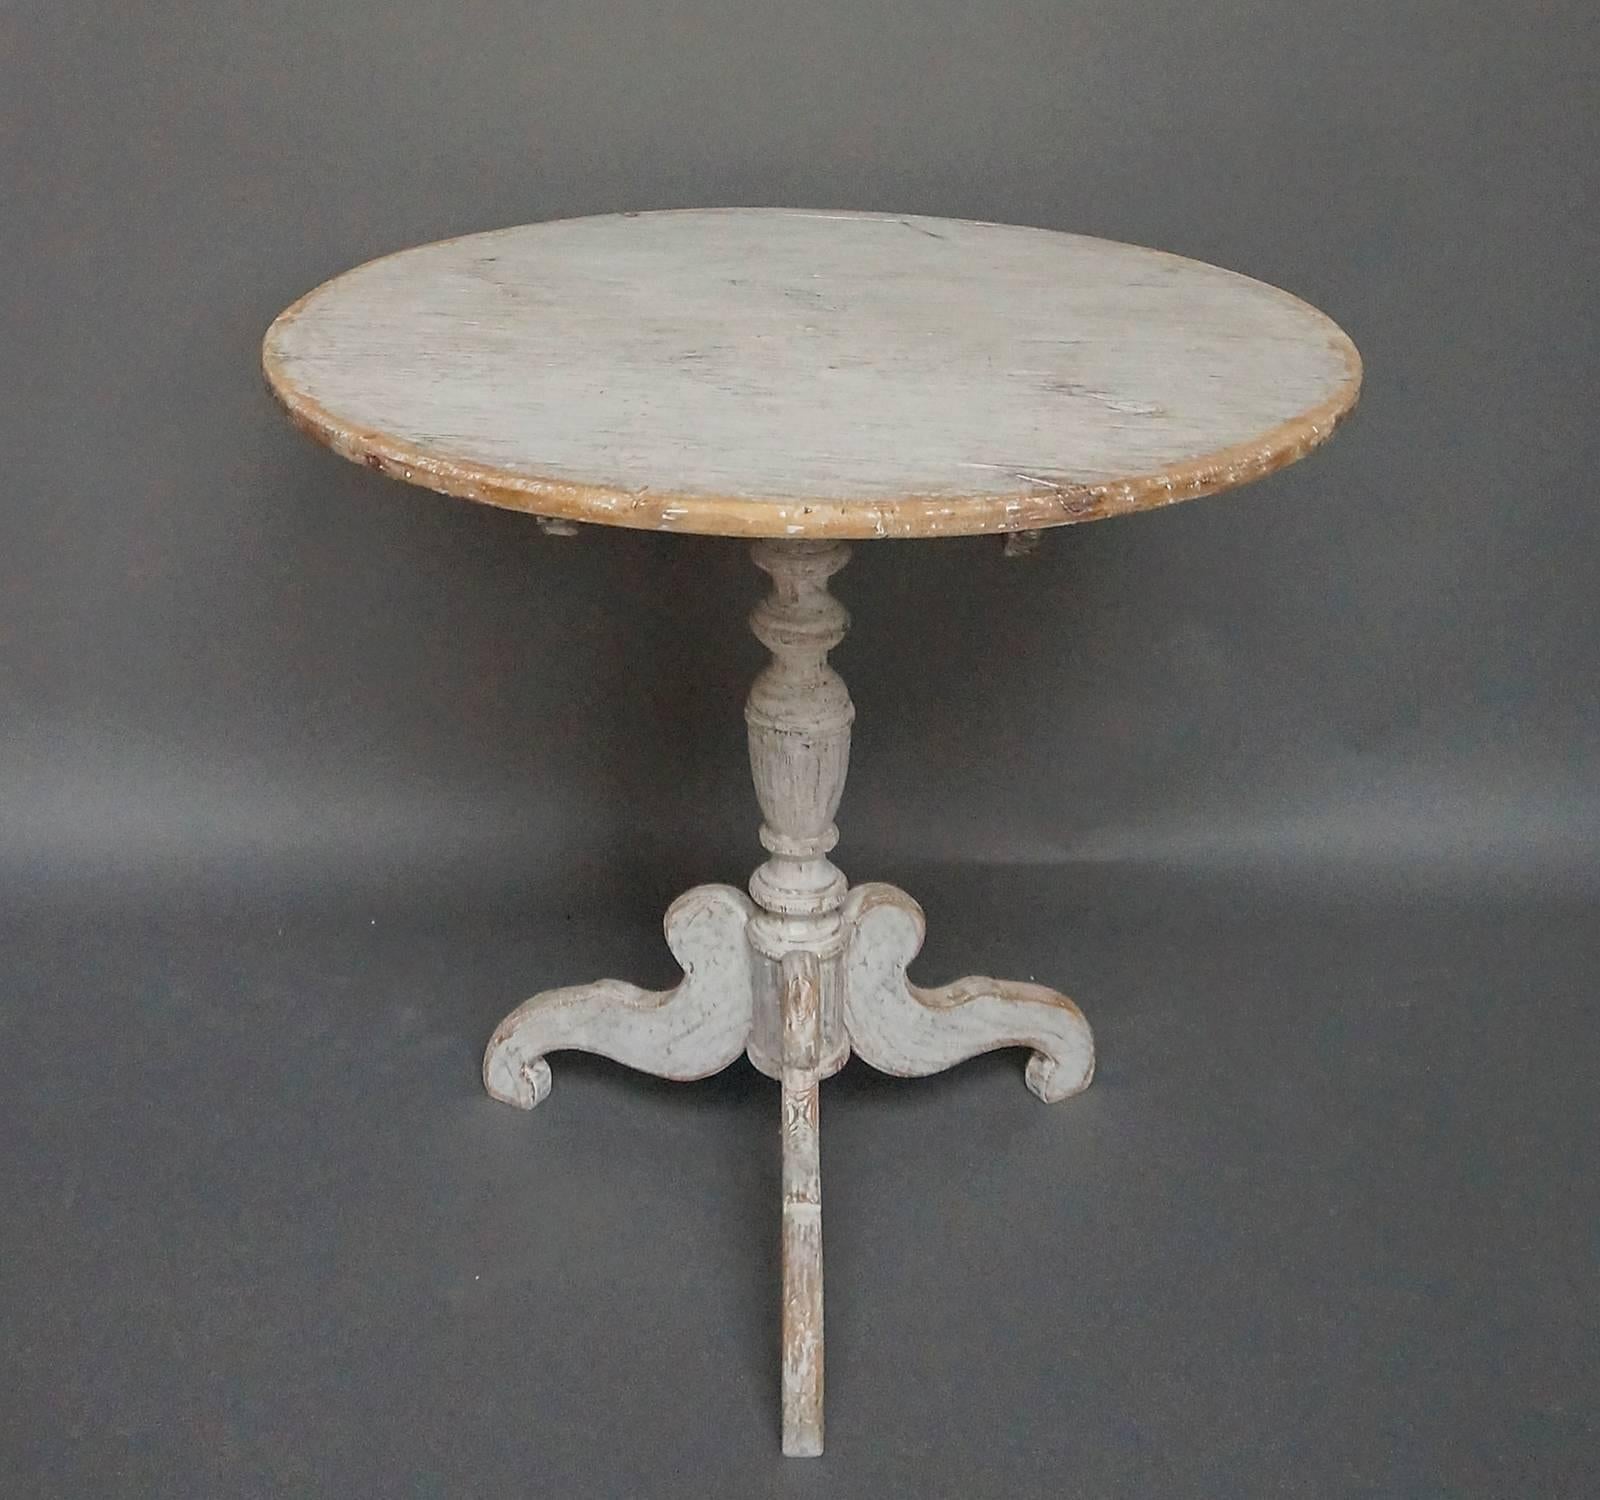 Round tilt-top table, Sweden, circa 1850, with turned pedestal base and three cyma-curved legs. Worn white paint.